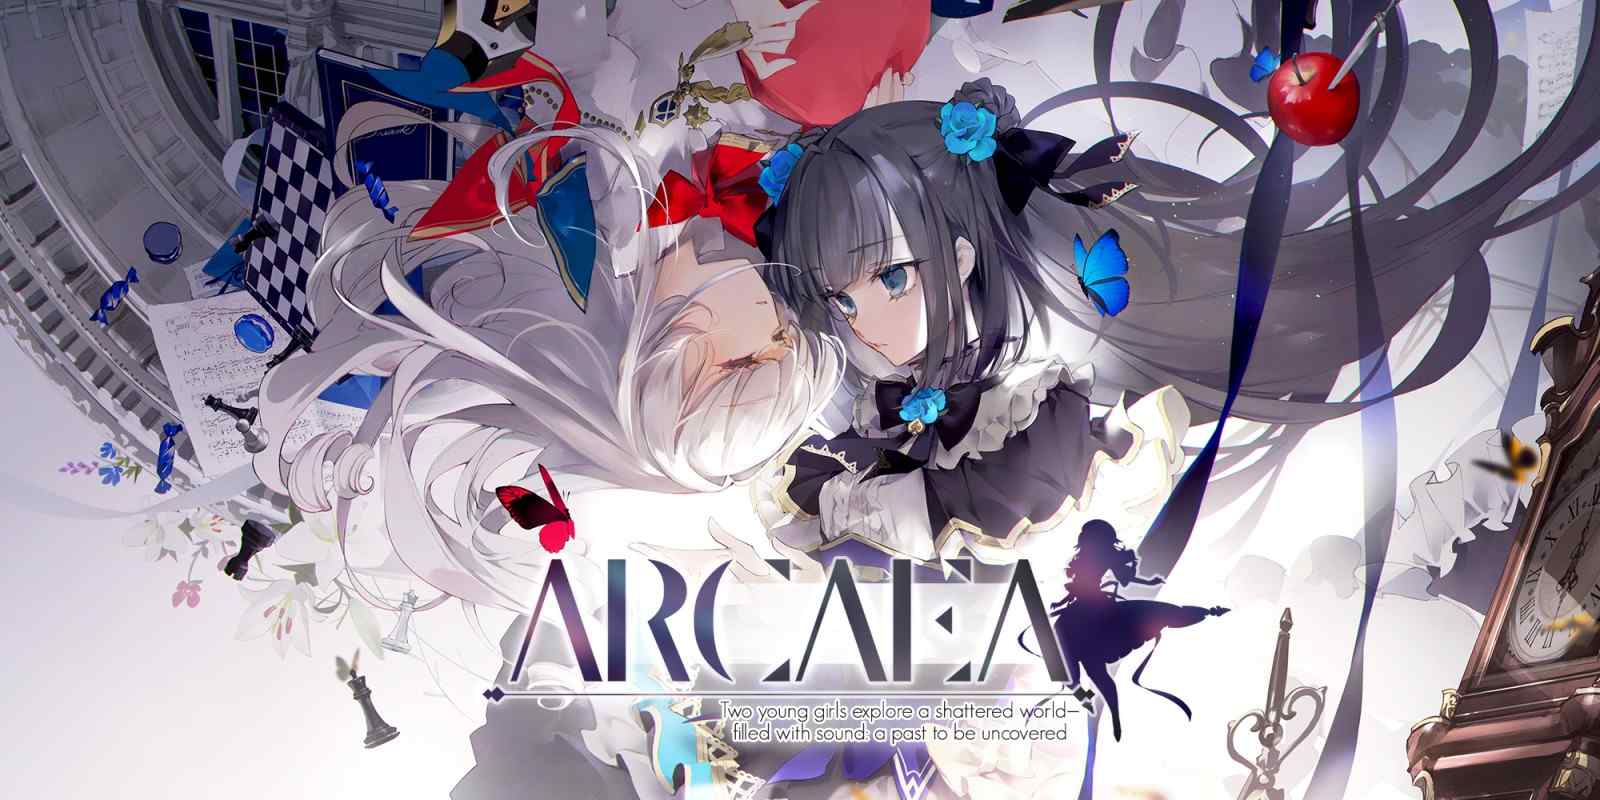 Arcaea is a music rhythm game developed by Lowiro and published by Flyhigh Works.